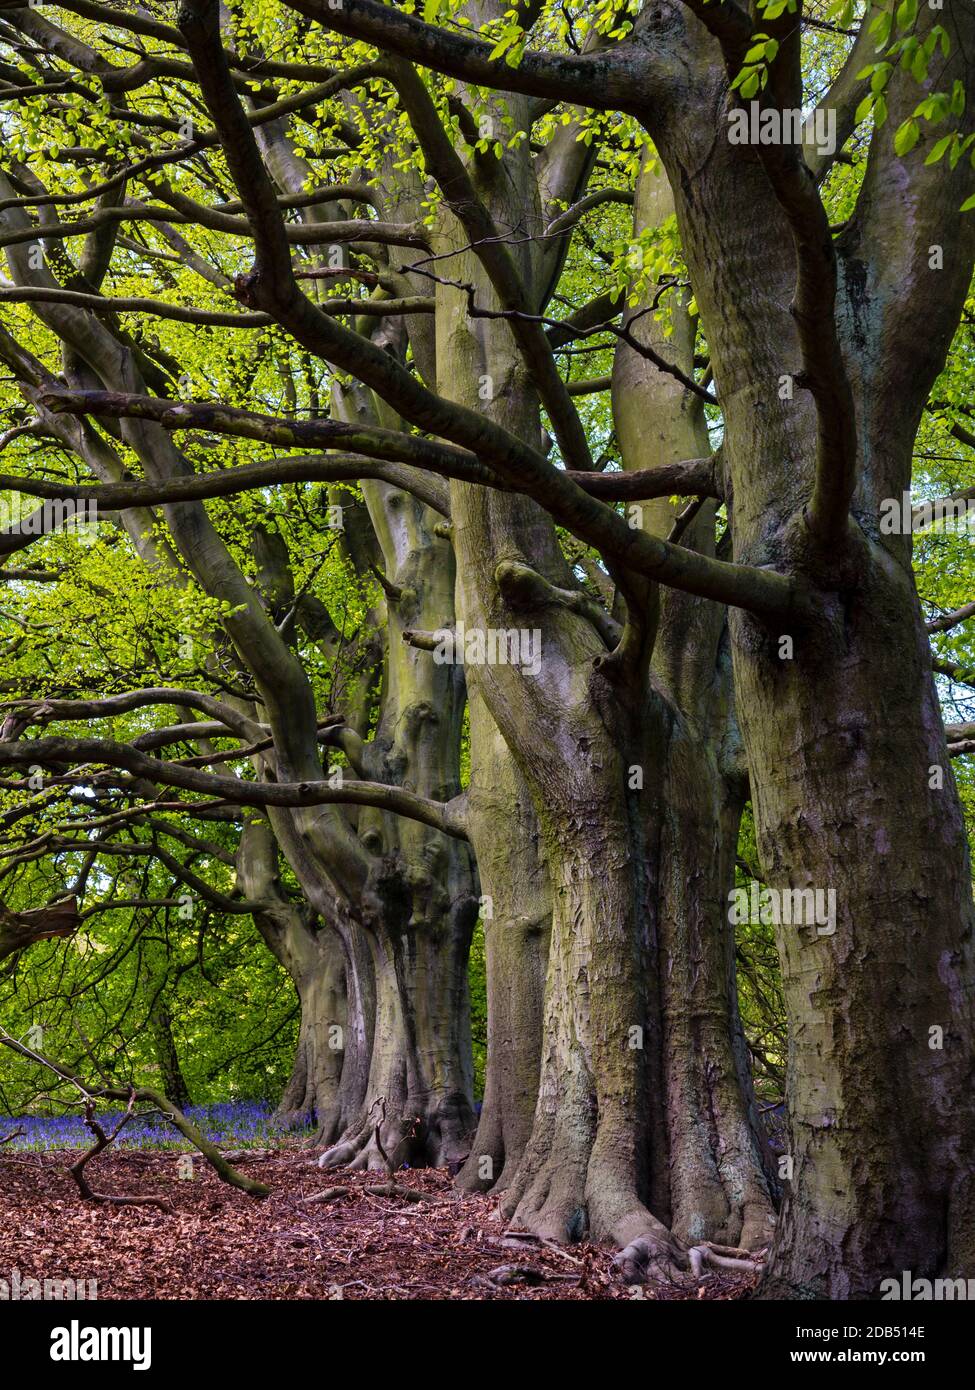 Fagus sylvatica, the European beech or common beech, a deciduous tree belonging to the beech family Fagaceae growing at Bow Wood Derbyshire UK Stock Photo